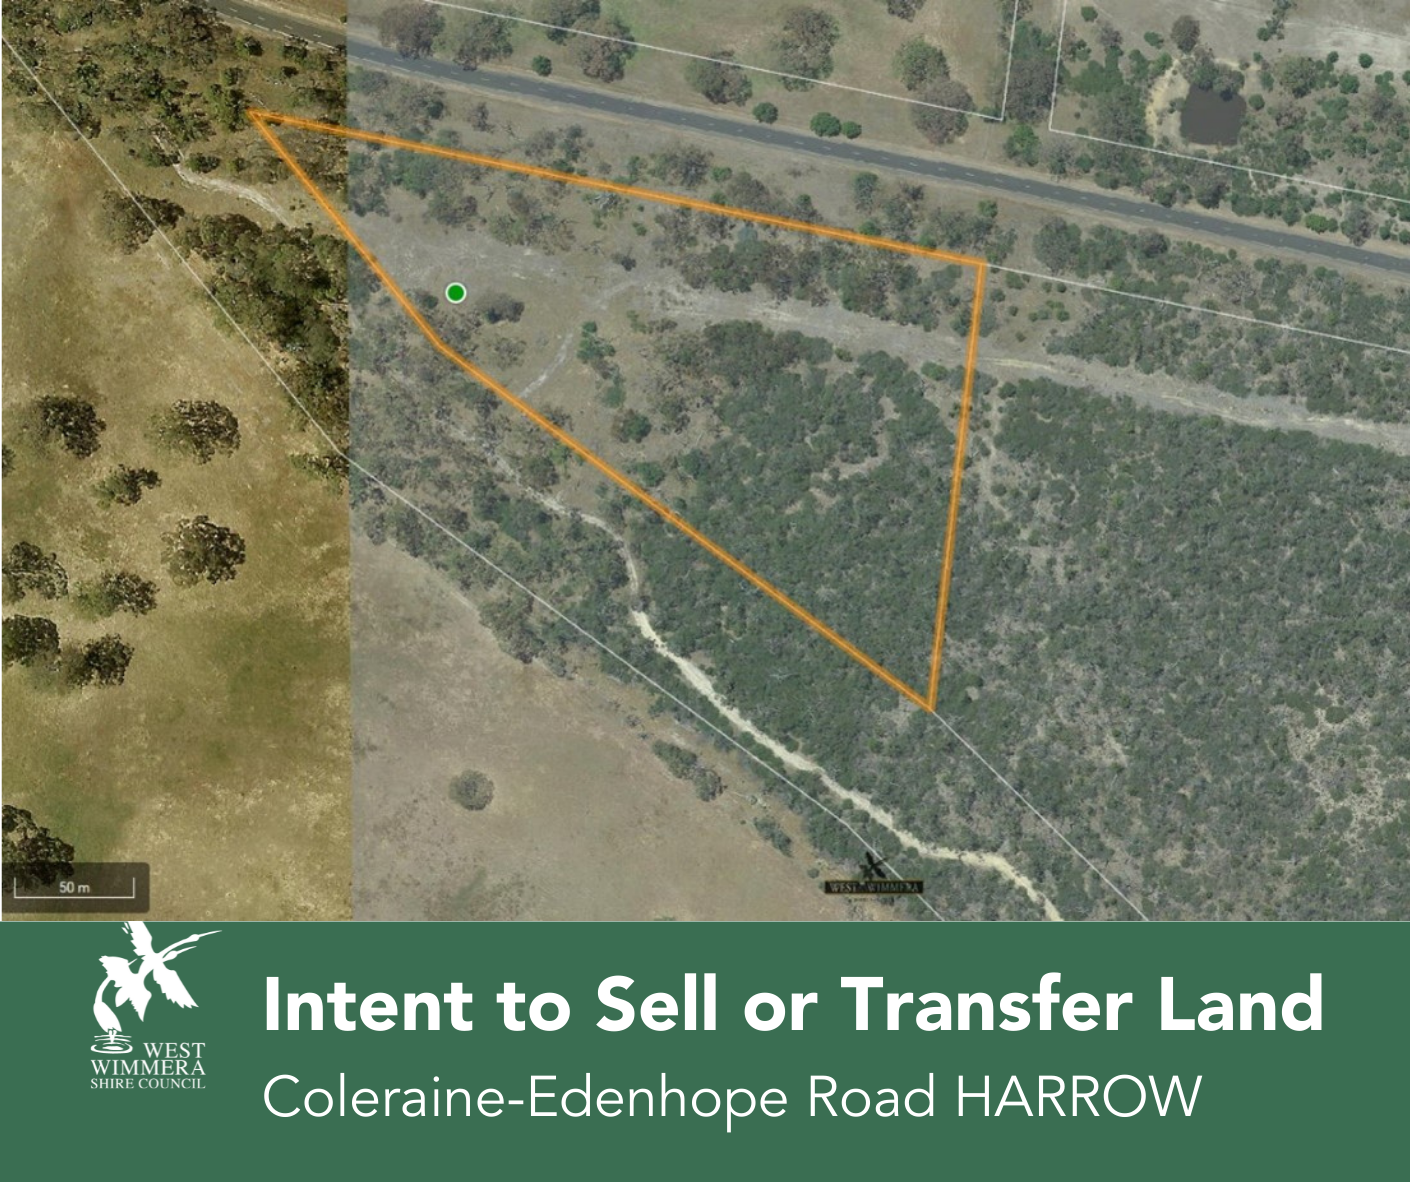 Copy of Intent to sell or transfer land .png